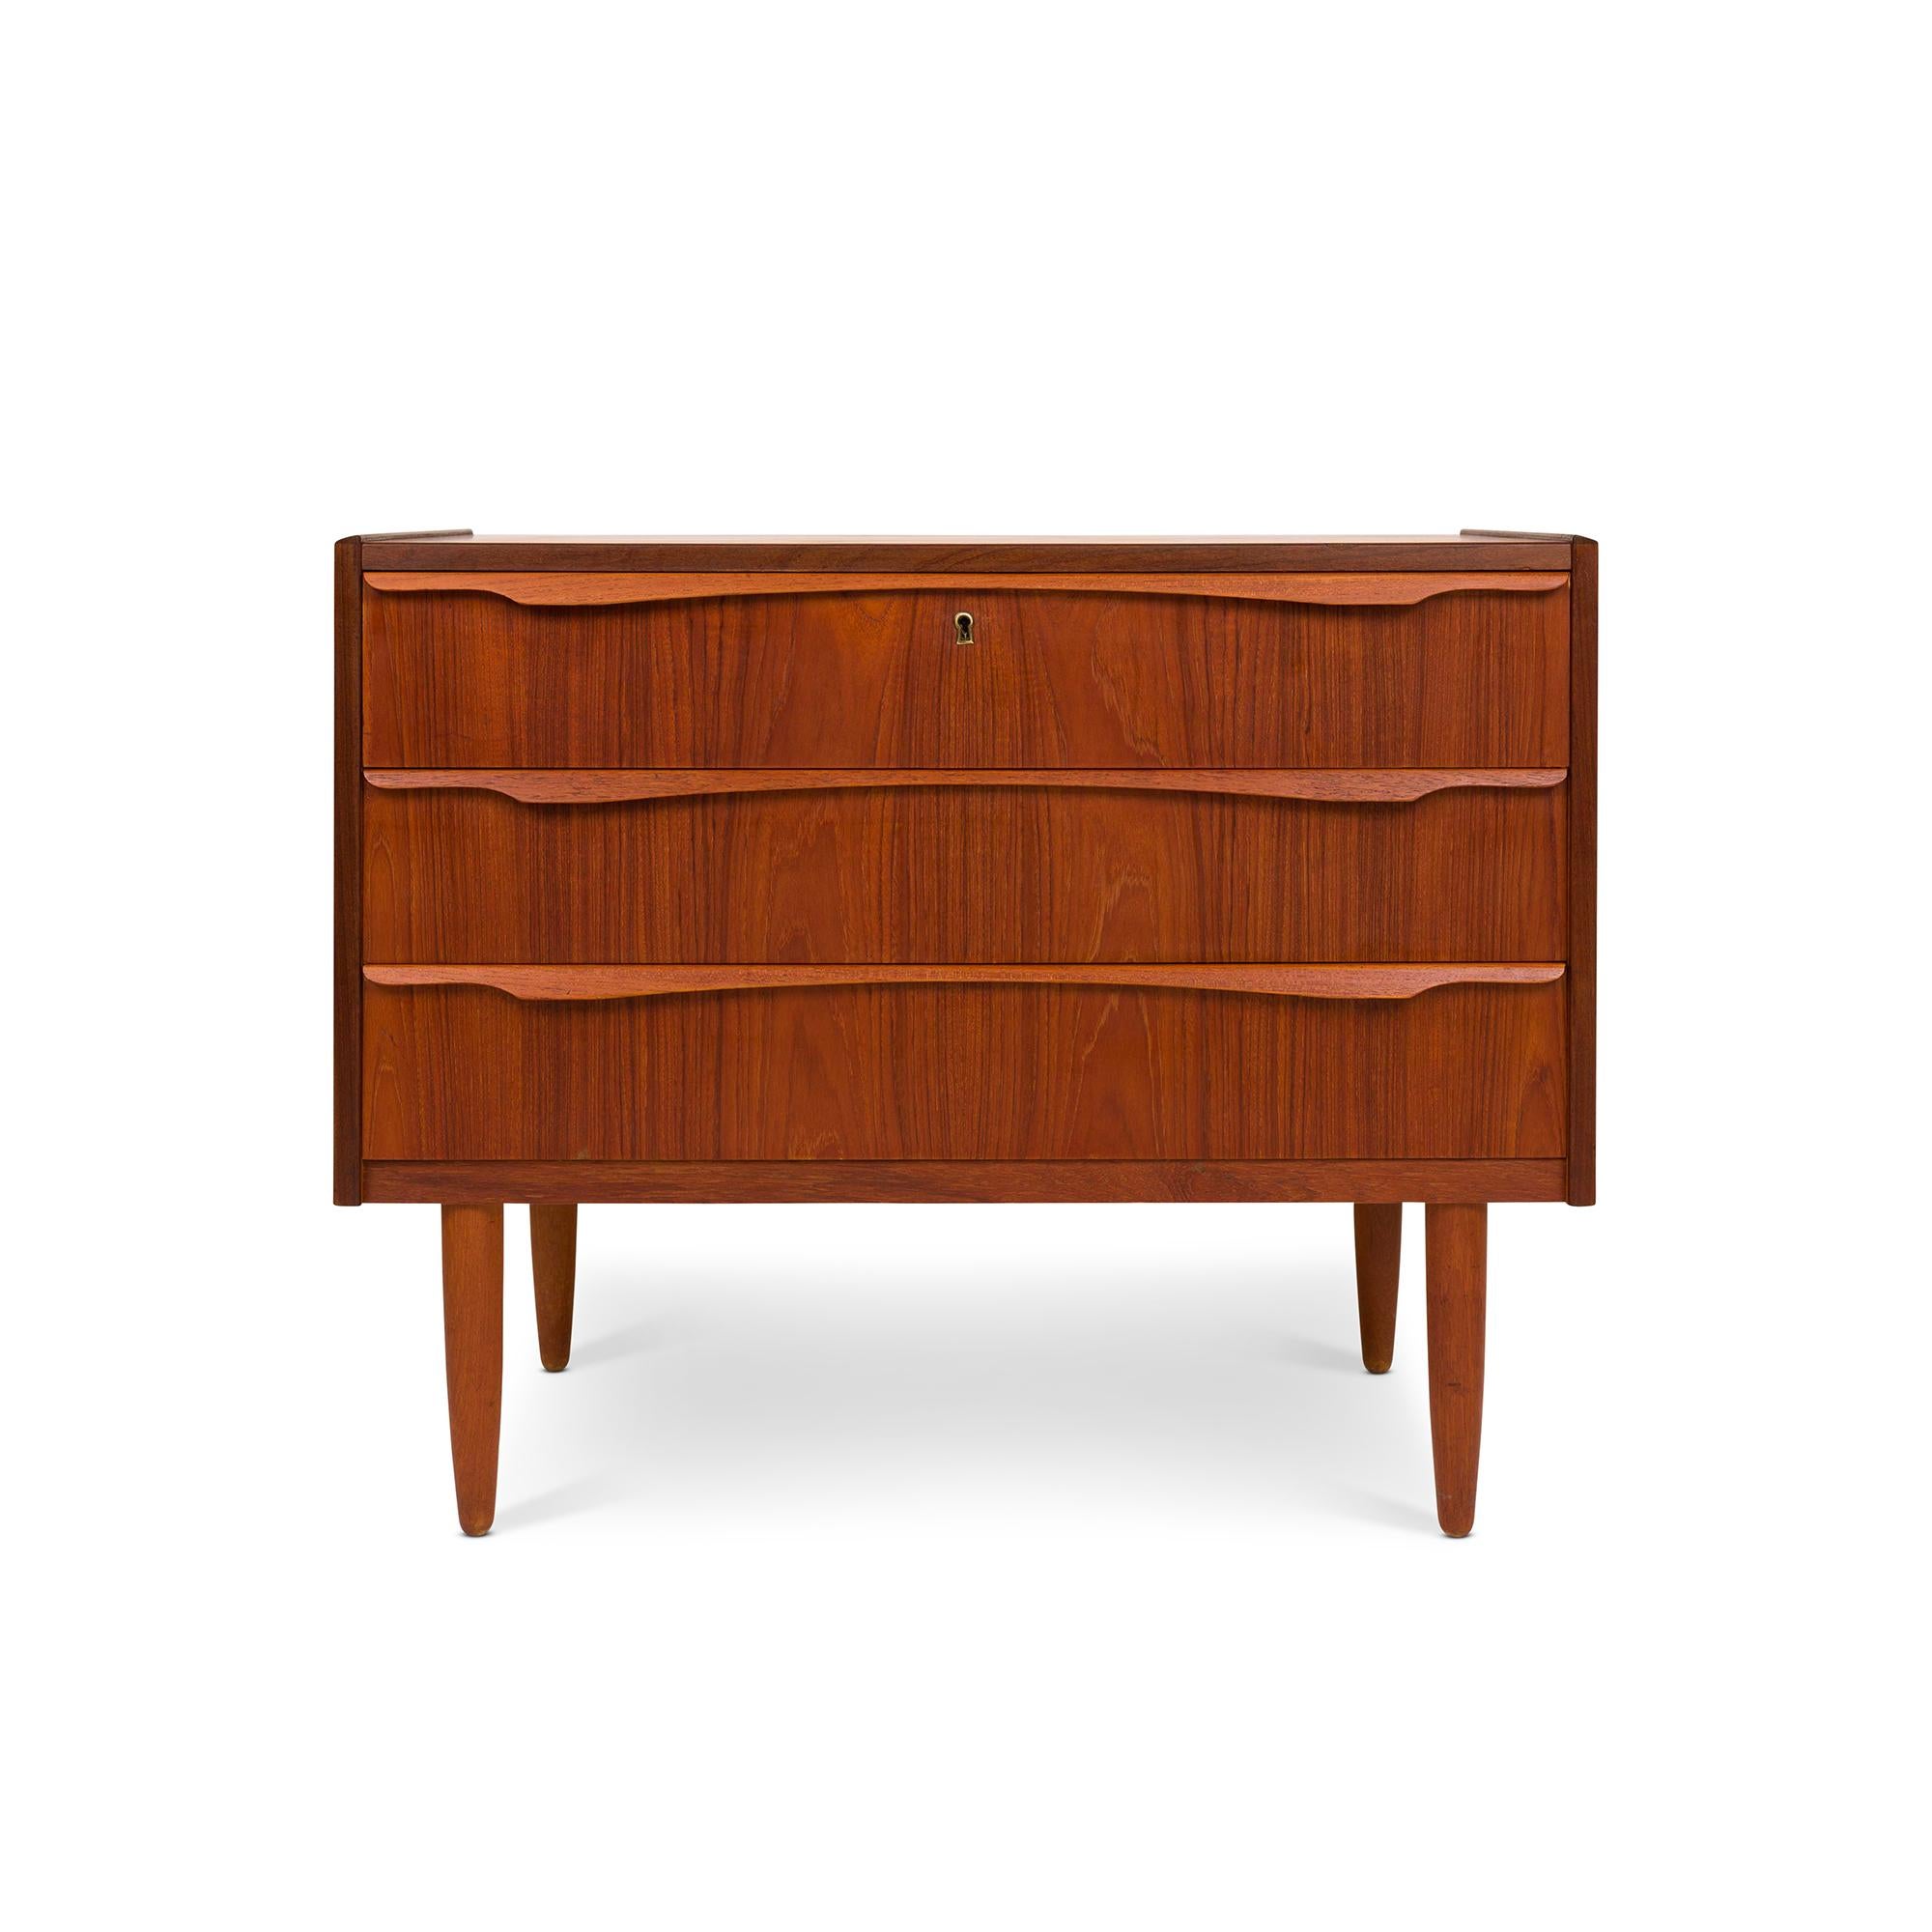 Danish Mid-Century furniture epitomizes Scandinavian design principles with its timeless elegance, functionality, and exceptional craftsmanship. Flourishing in the 1950s and 1960s, it reflects post-war sensibilities of simplicity and connection to